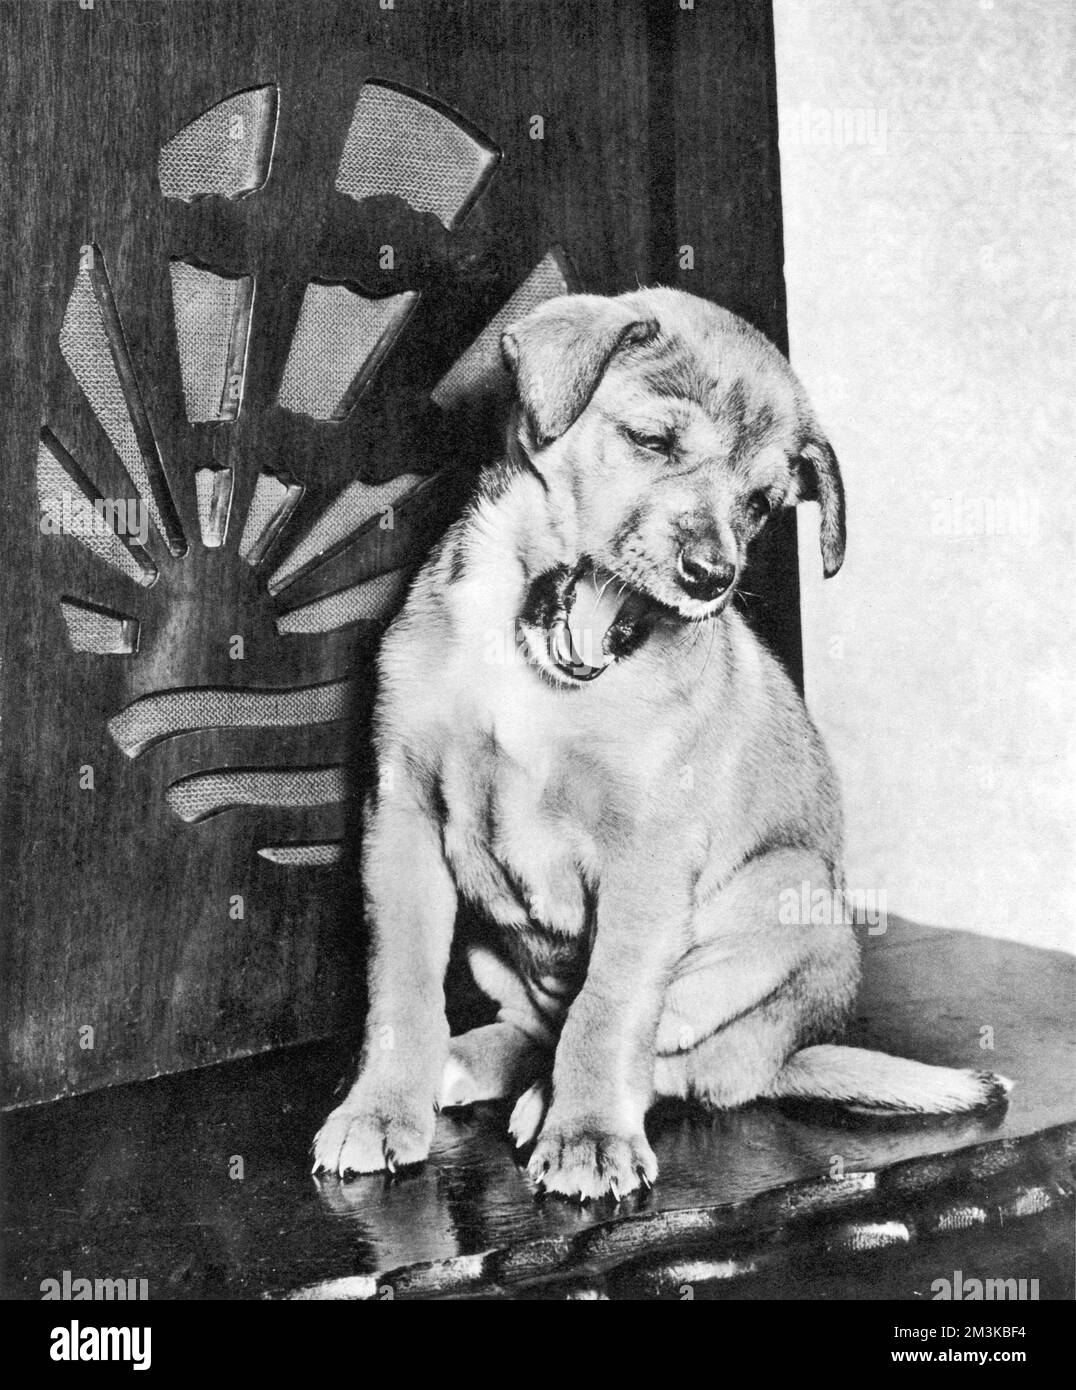 A small puppy yawns while sitting in front of an old-fashioned wireless radio set.     Date: 1958 Stock Photo